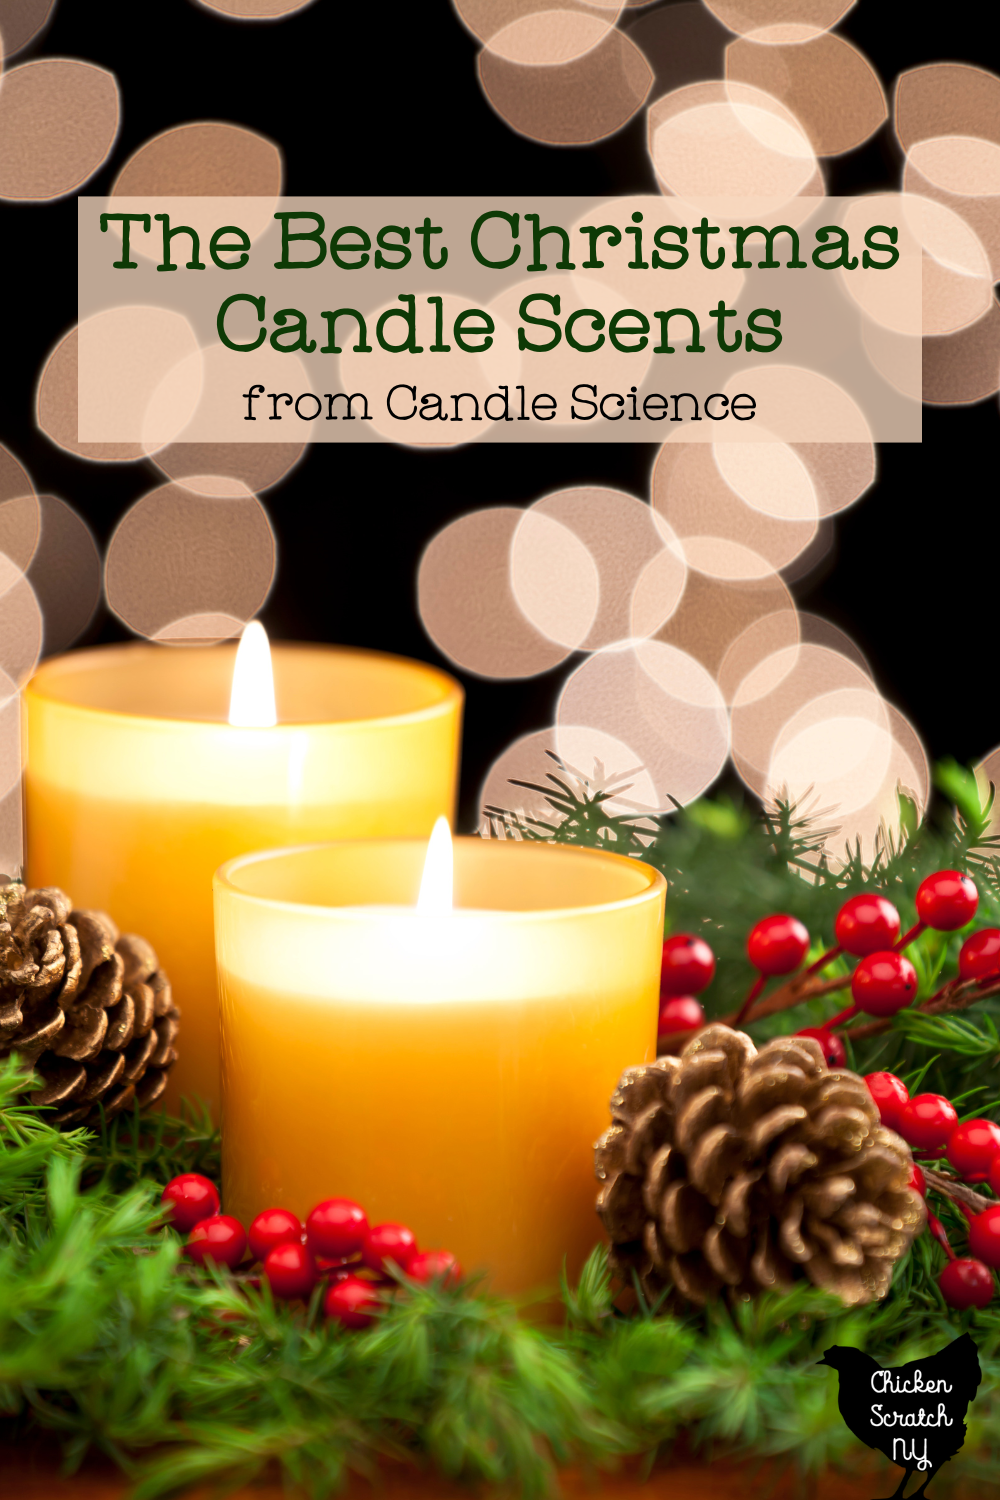 https://chickenscratchny.com/wp-content/uploads/2022/11/Christmas-Candle-Science.png